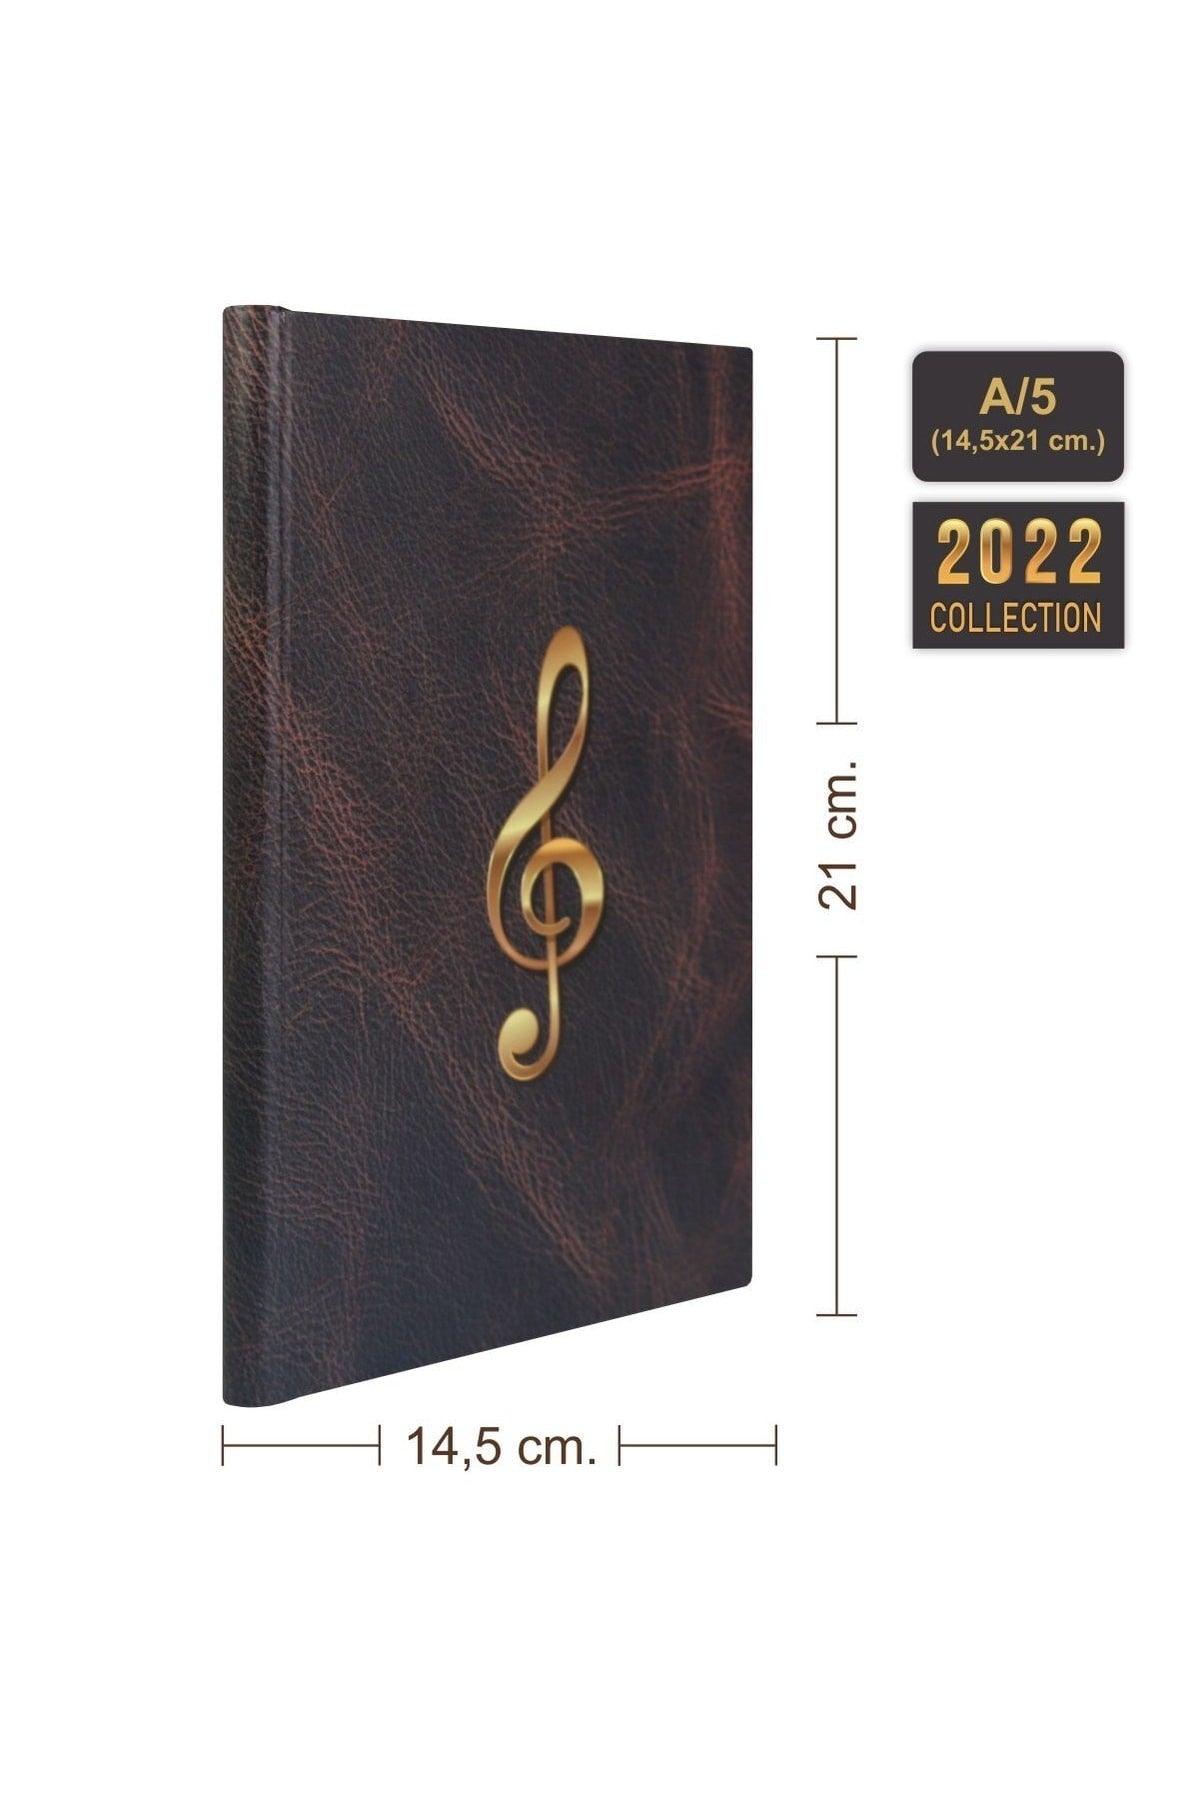 Music Notebook (with Neutral Key) - Custom Hand